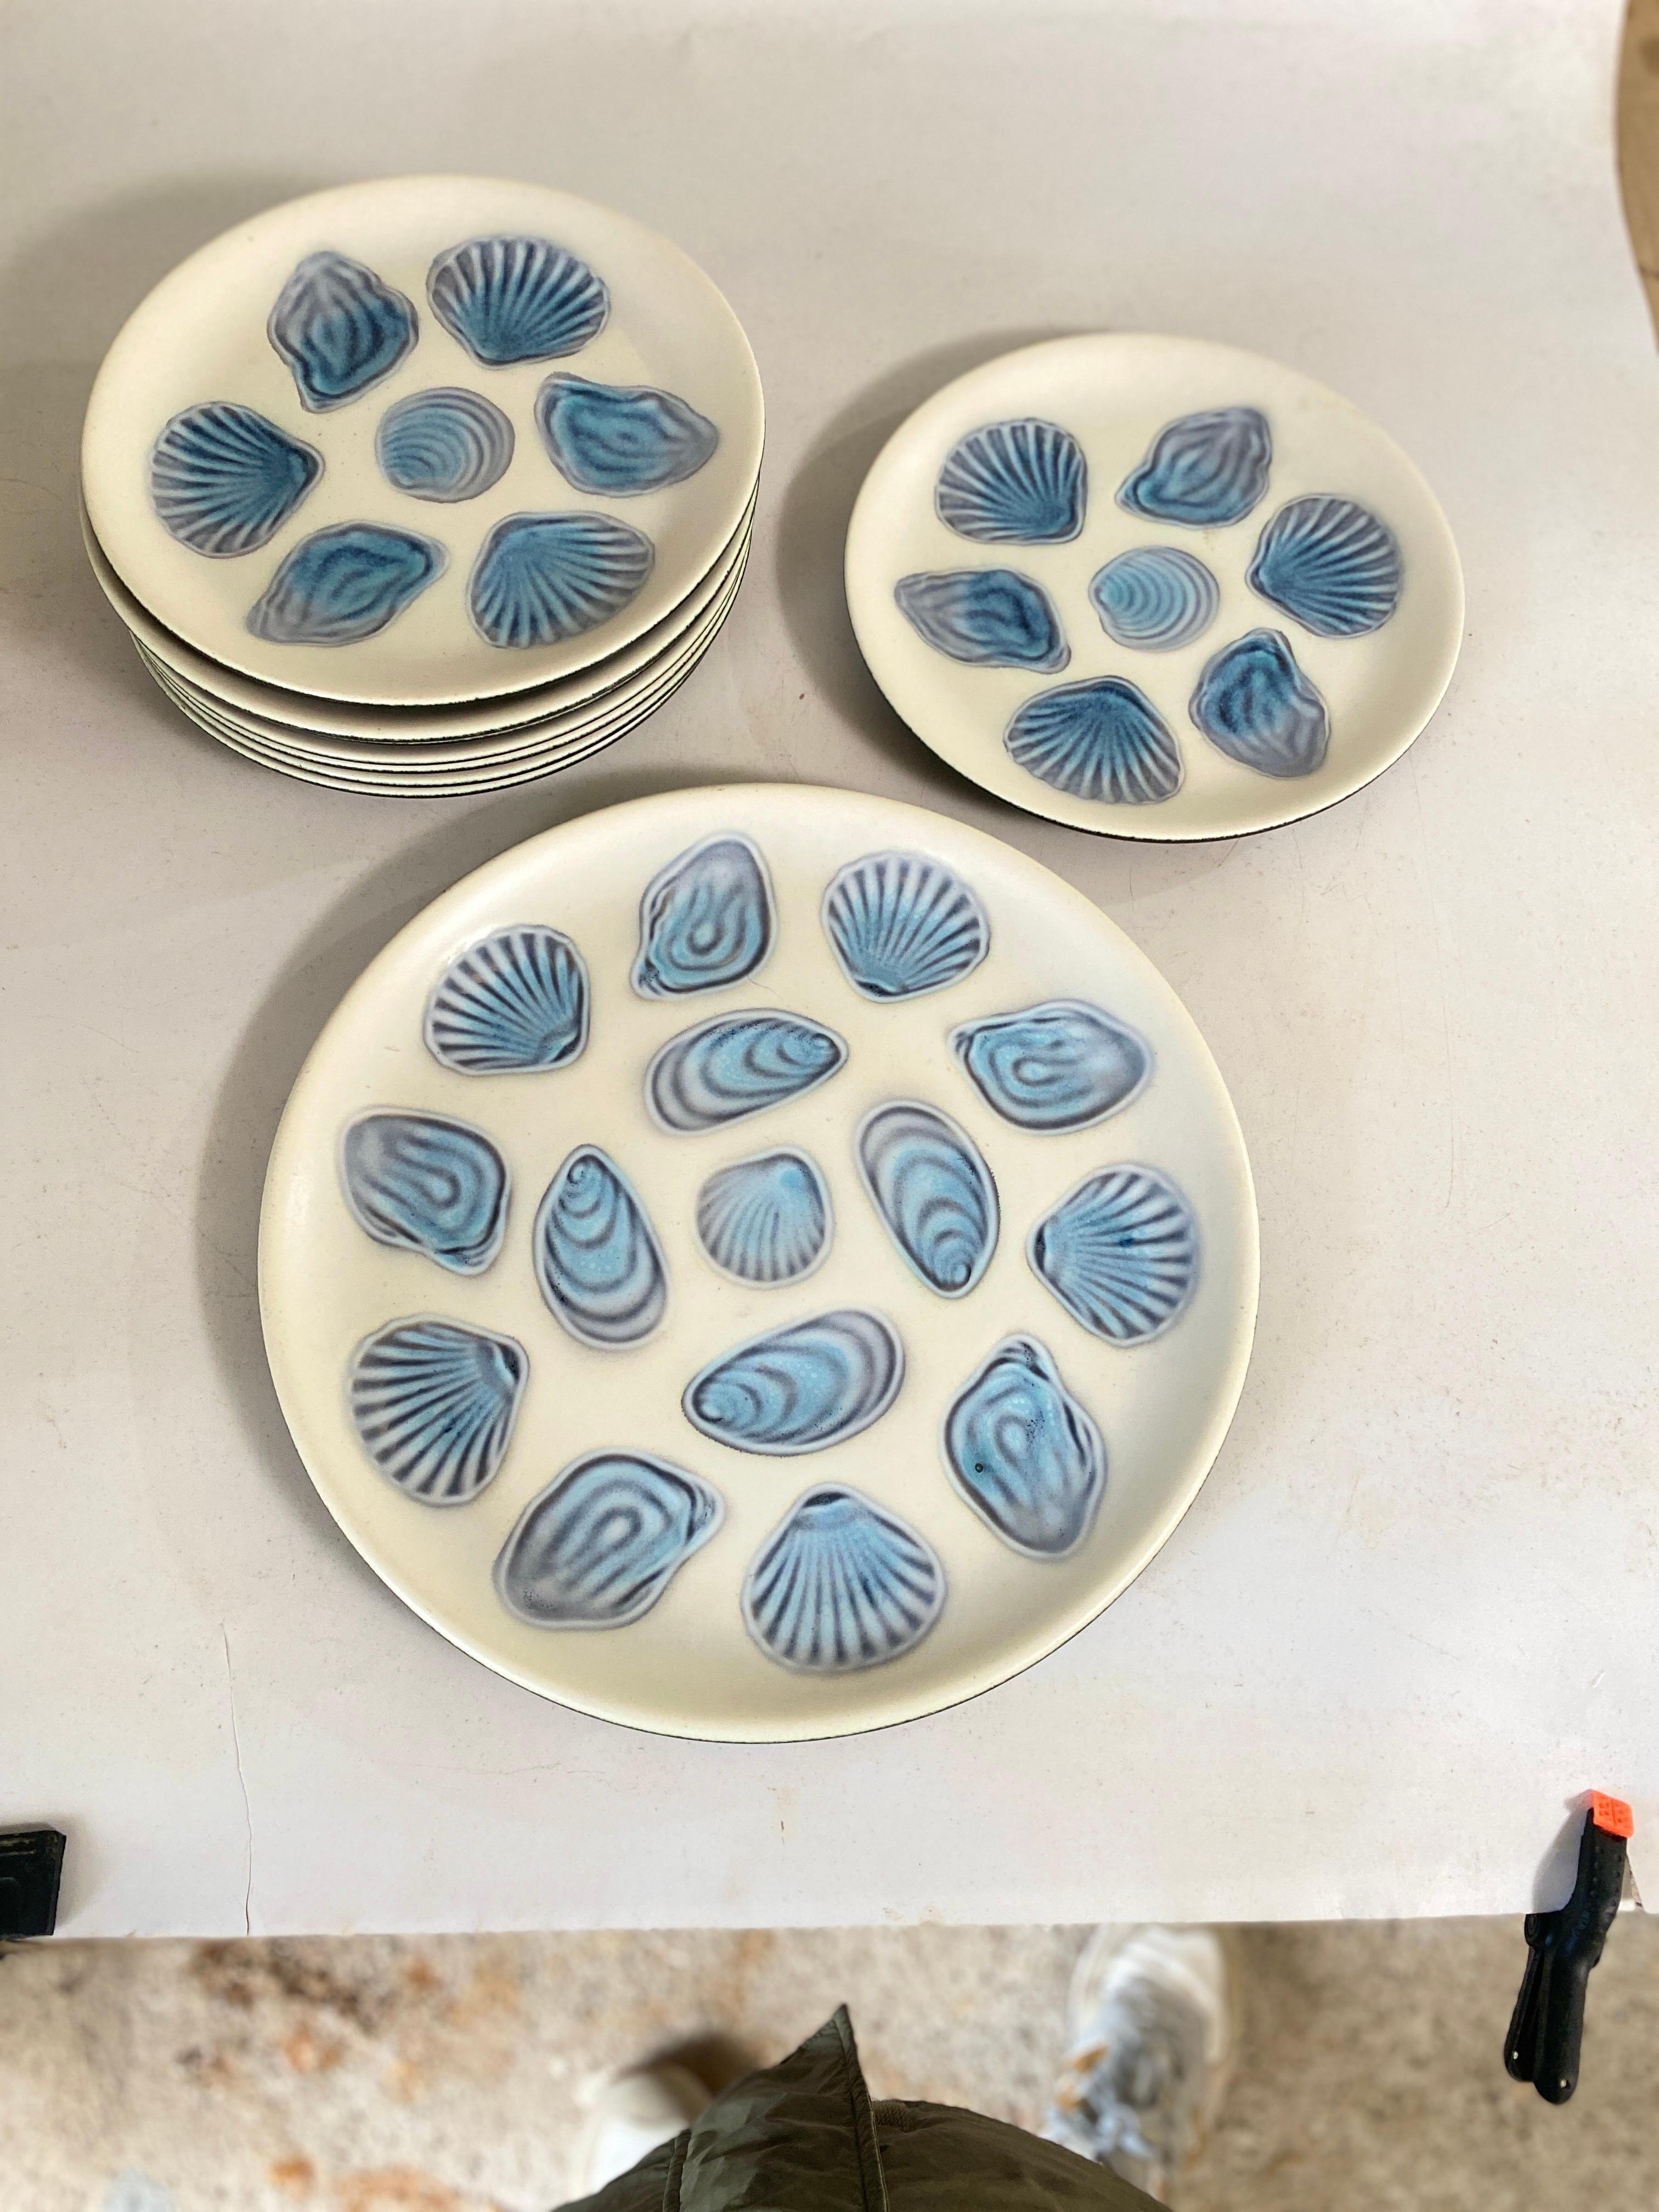 2 Large Oyster Plates and 6 Plates in Ceramic Blue and White France by Elchinger For Sale 6